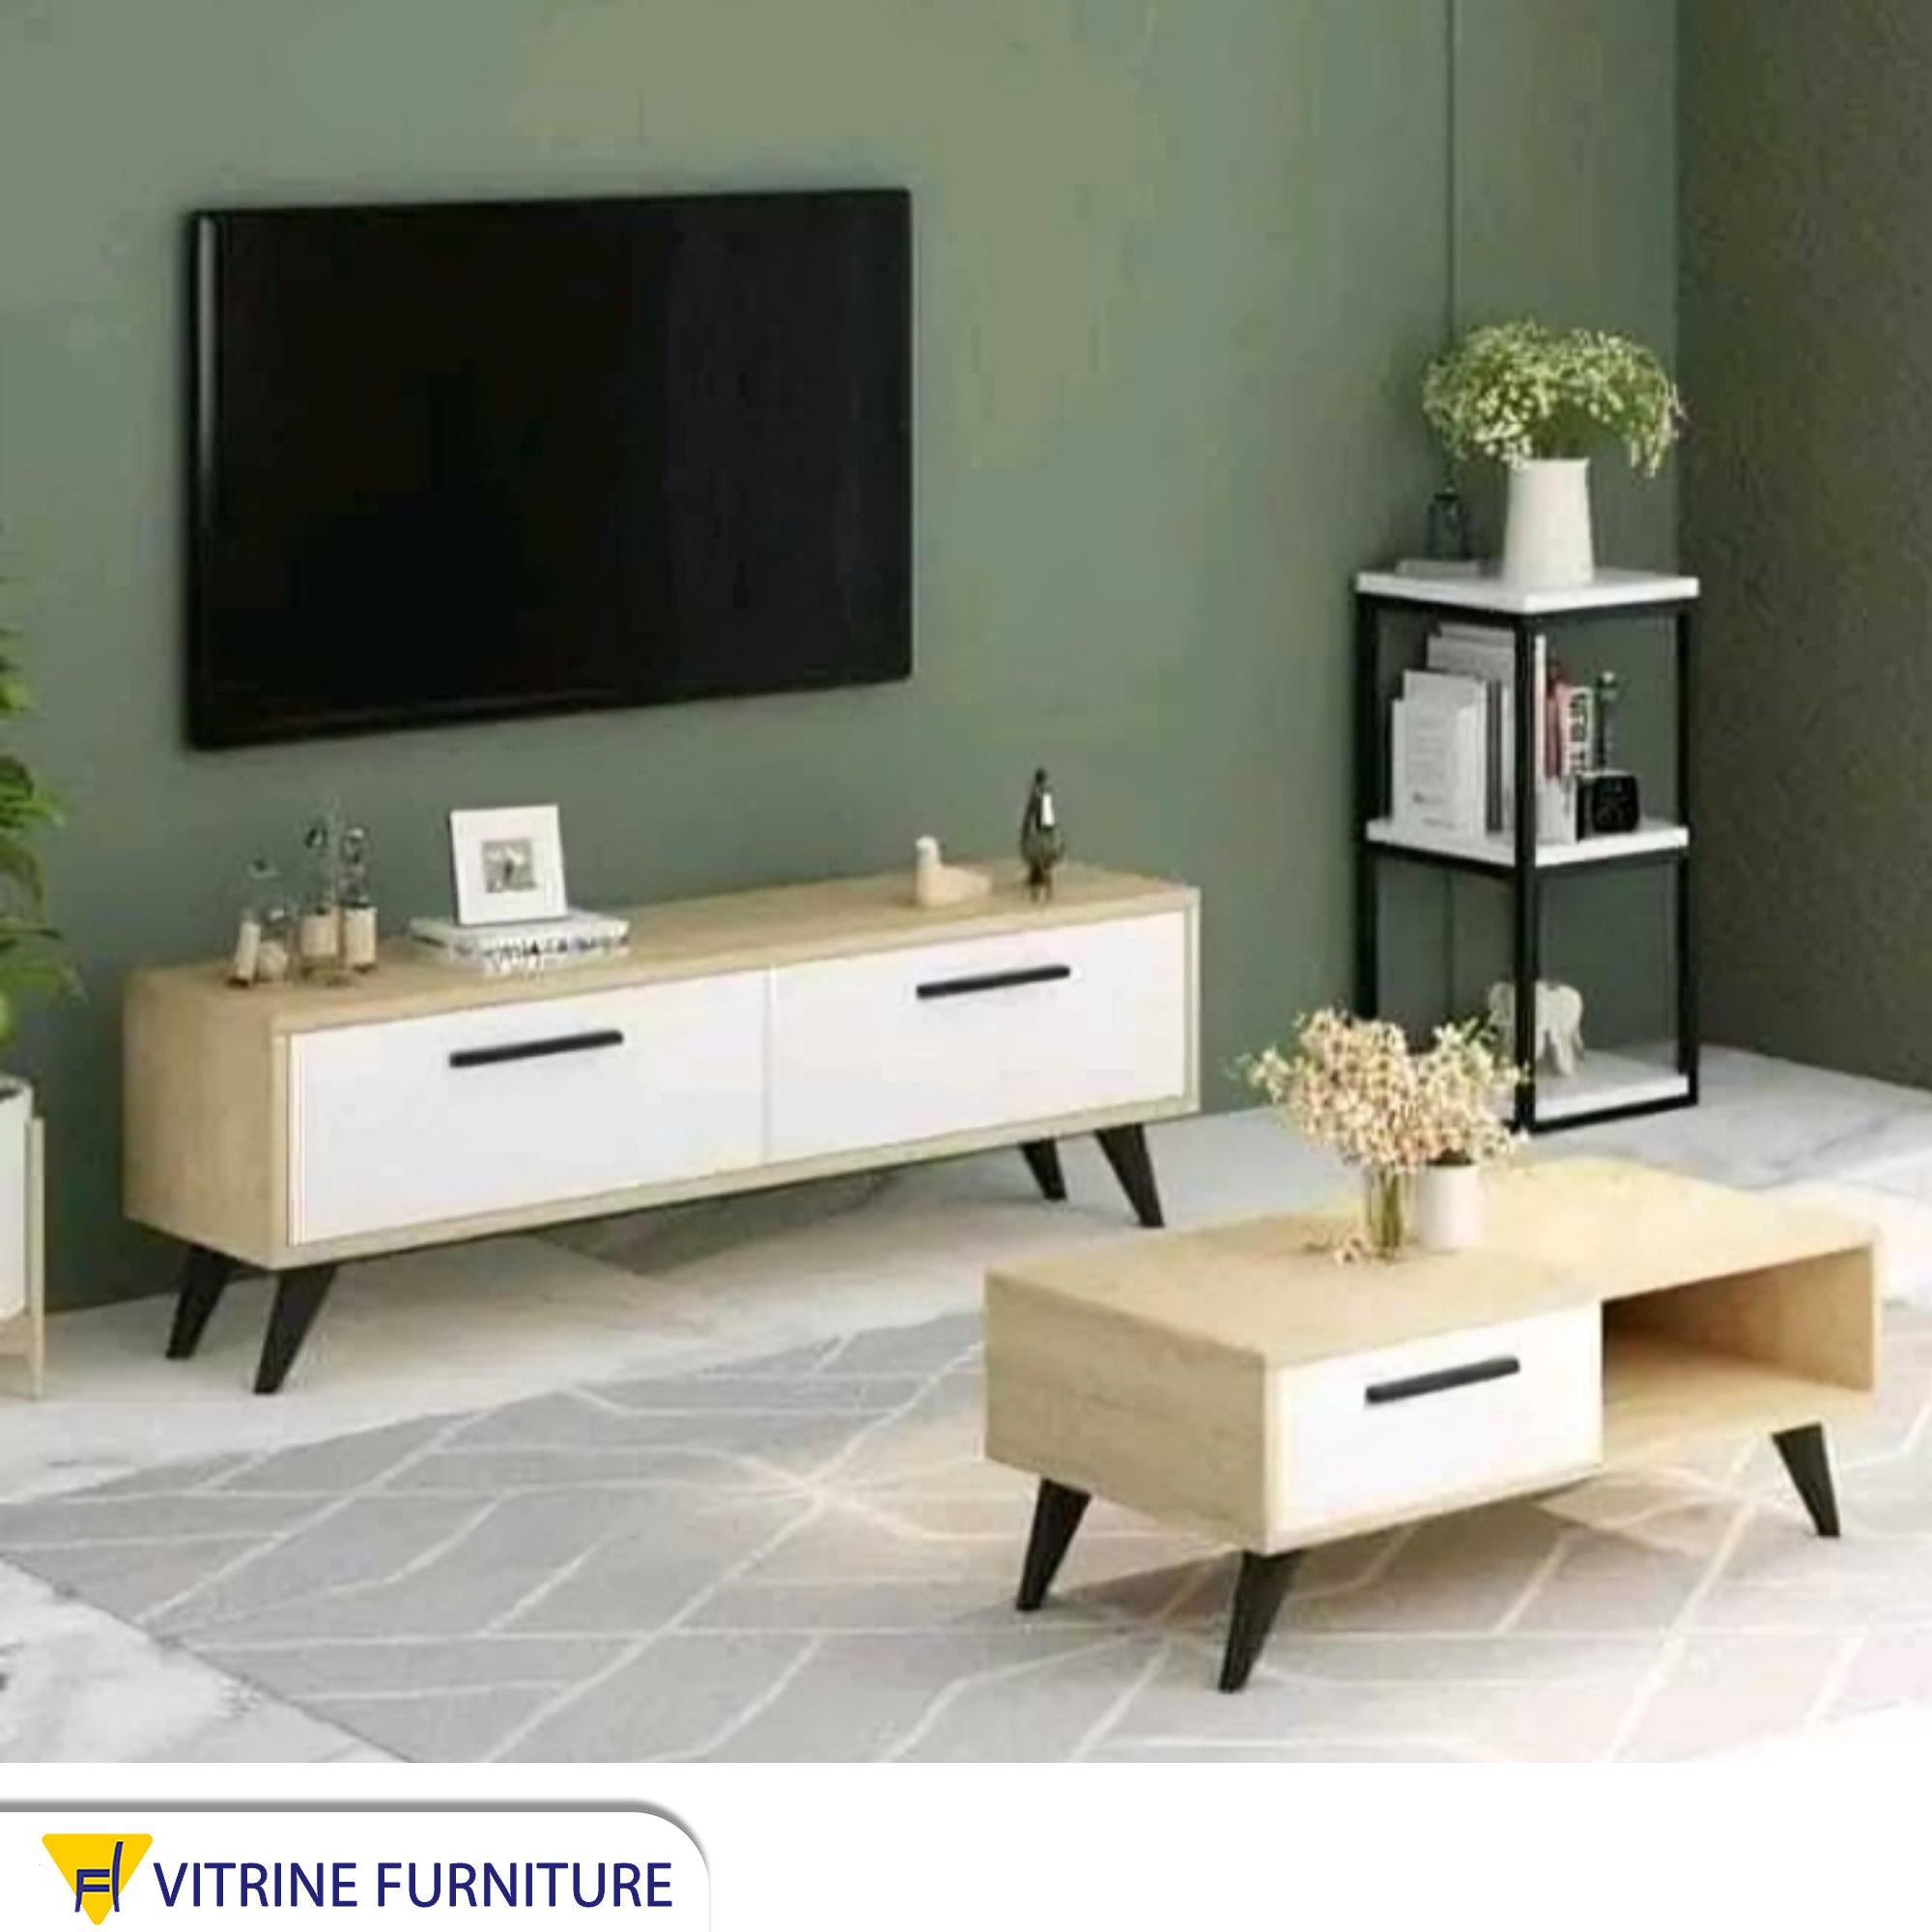 TV cabinet with white and beige coffee table